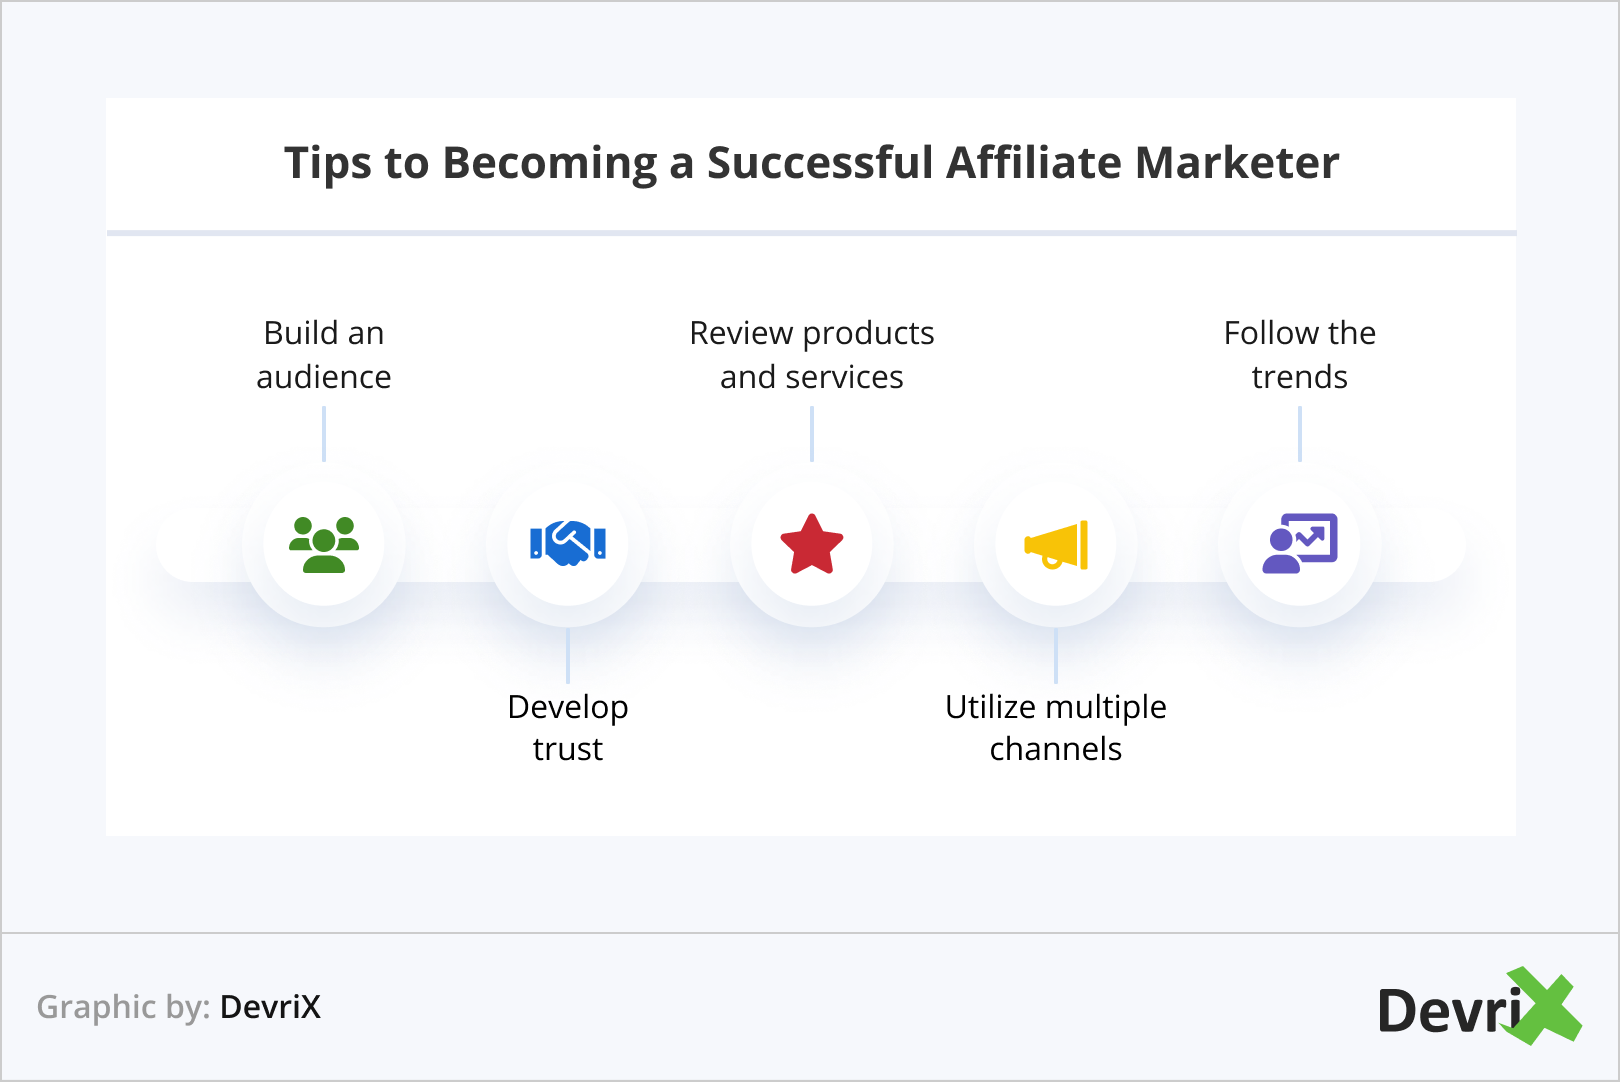 Tips to Becoming a Successful Affiliate Marketer